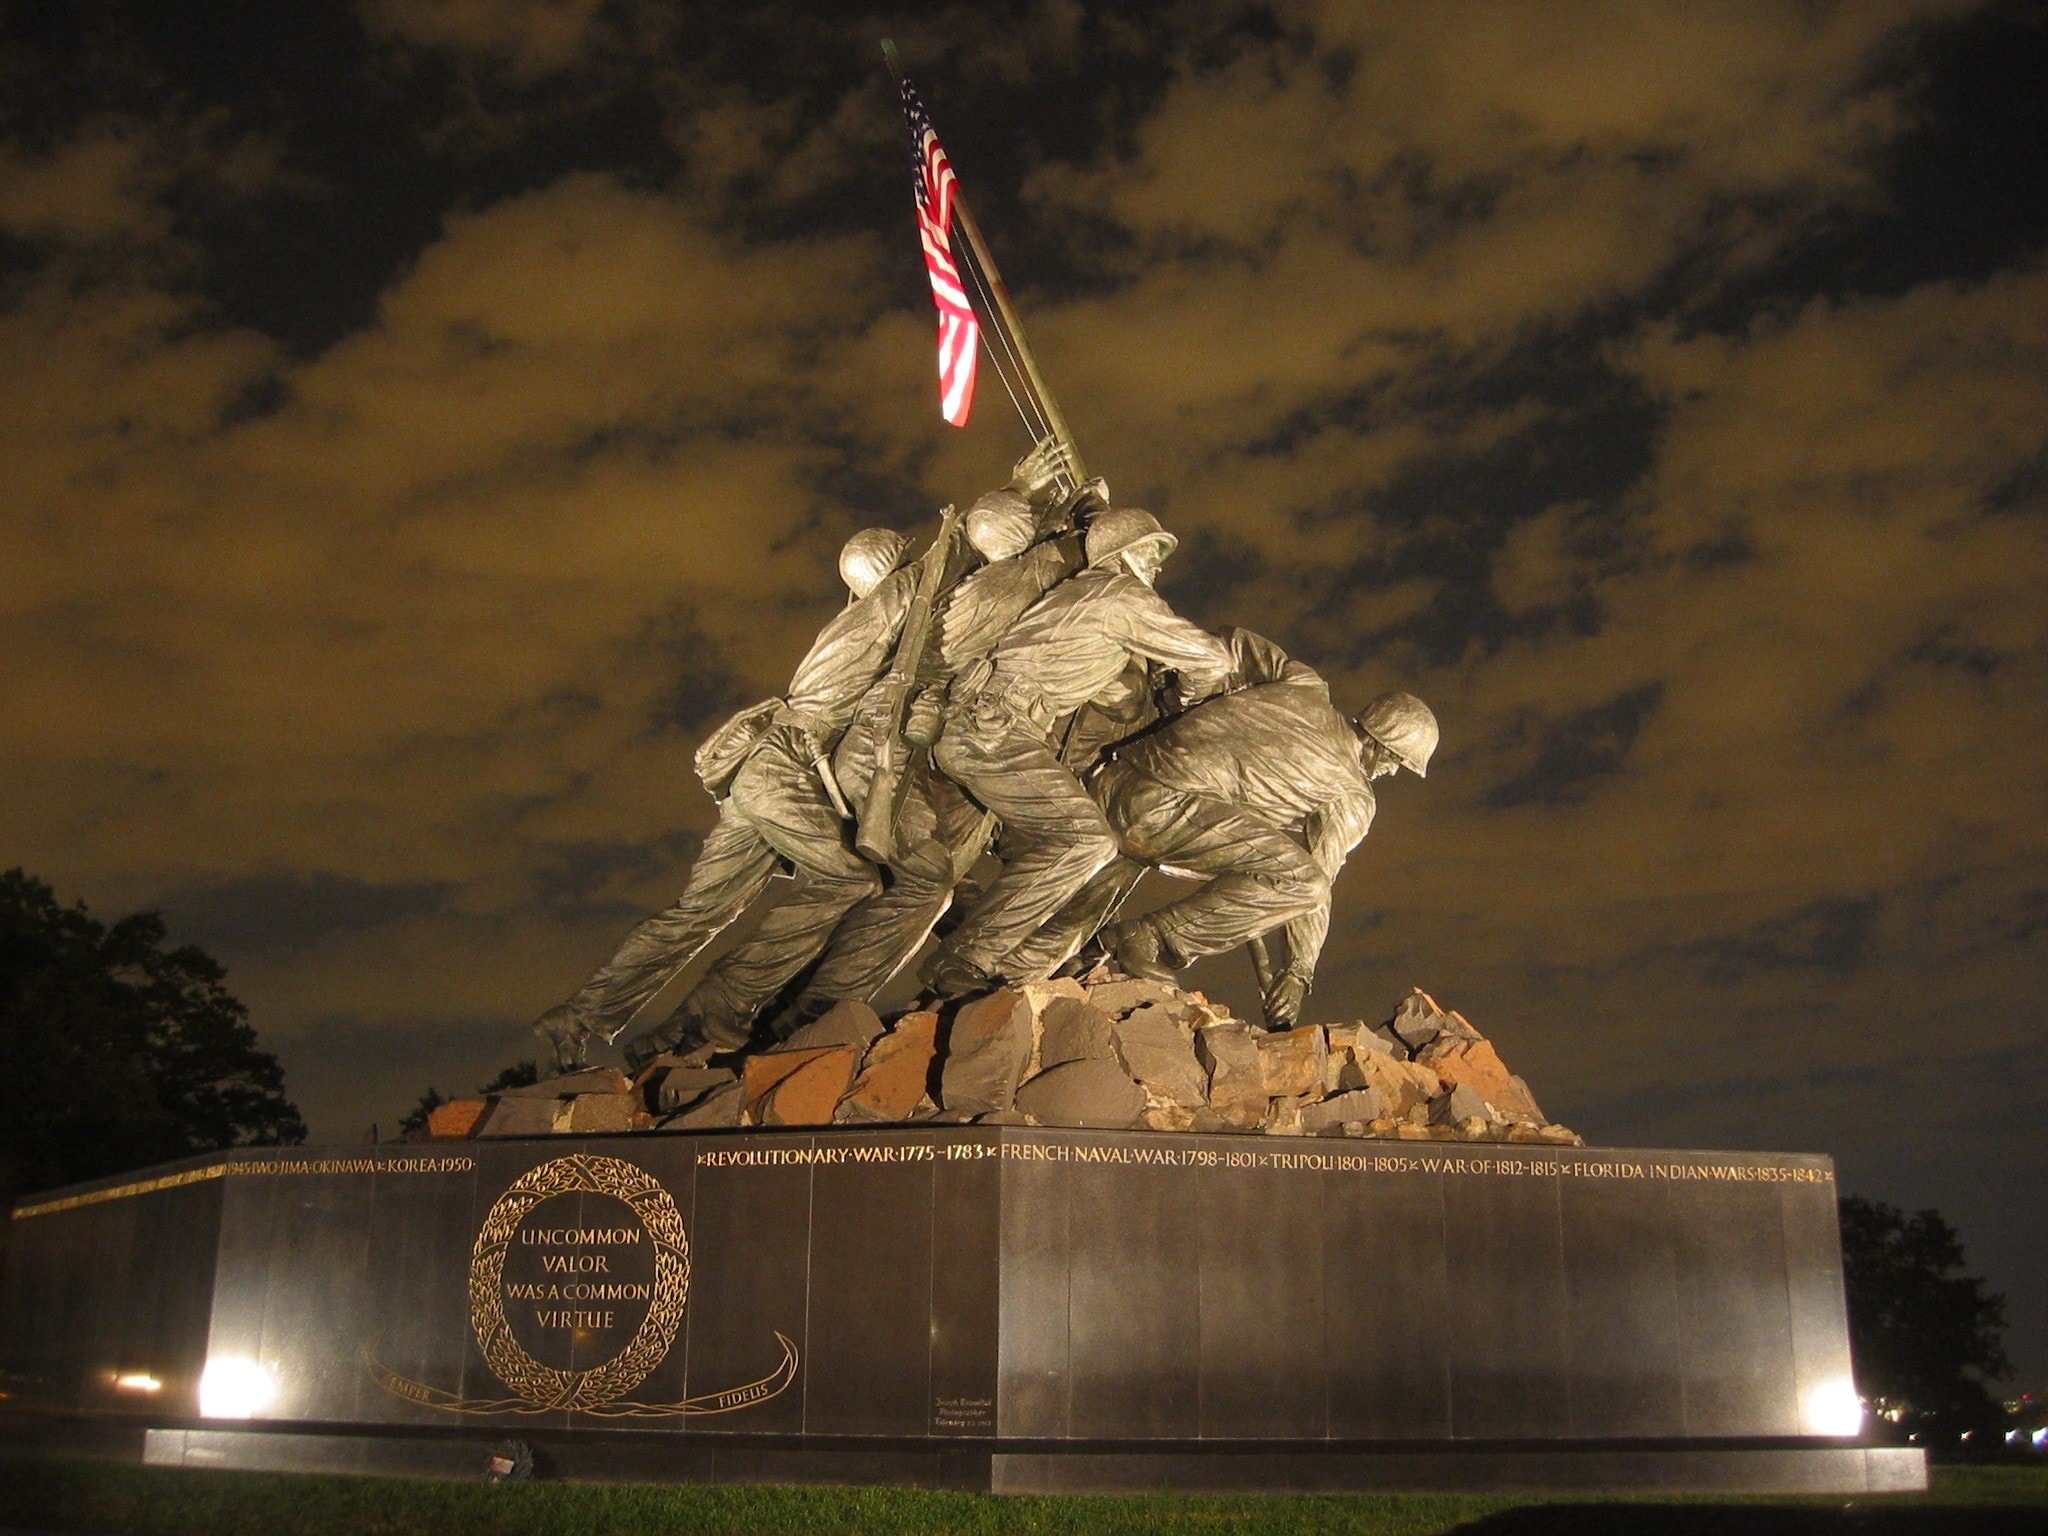 Meet Harlan Block, the Seventh-day Adventist Who Helped Raise the . Flag  on Iwo Jima | Adventist Review